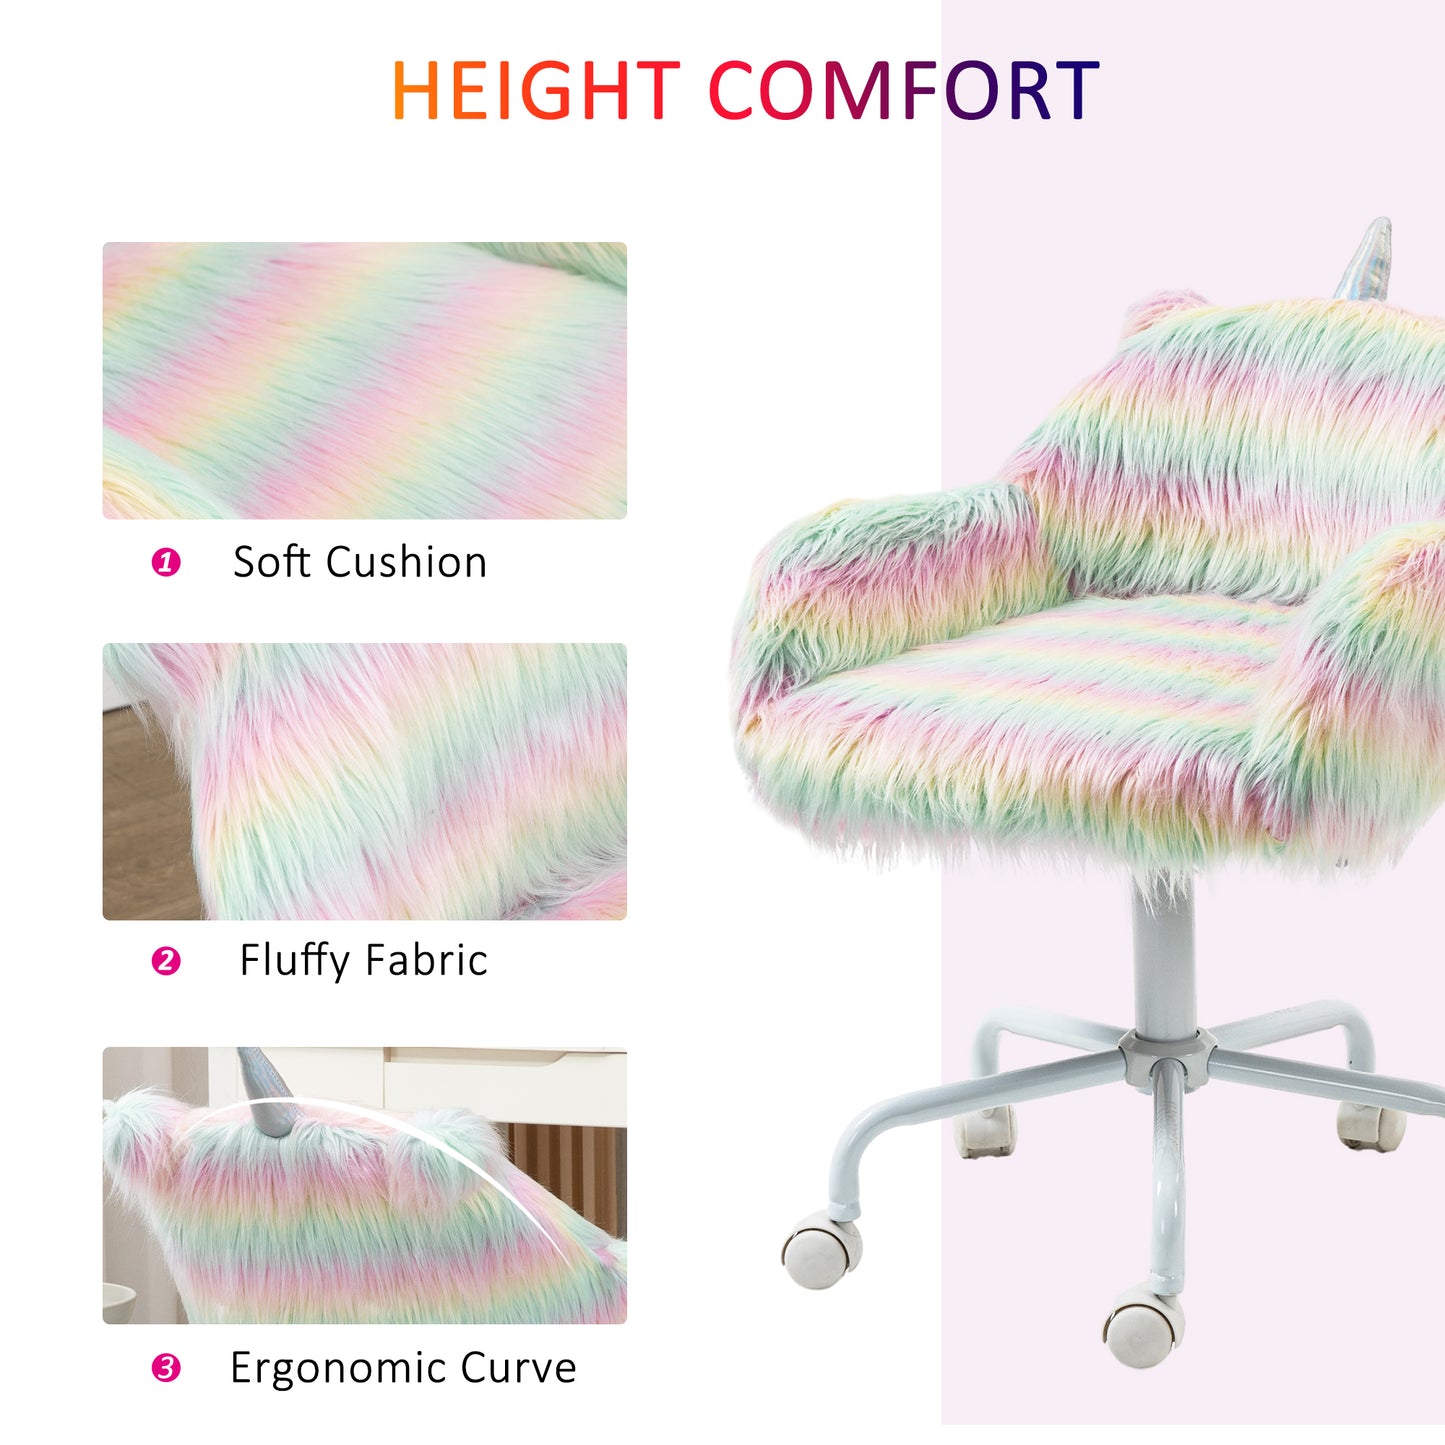 Vinsetto Unicorn Home Office Chair Height Adjustable Fluffy Desk Chair with Armrests and Swivel Wheels Colourful